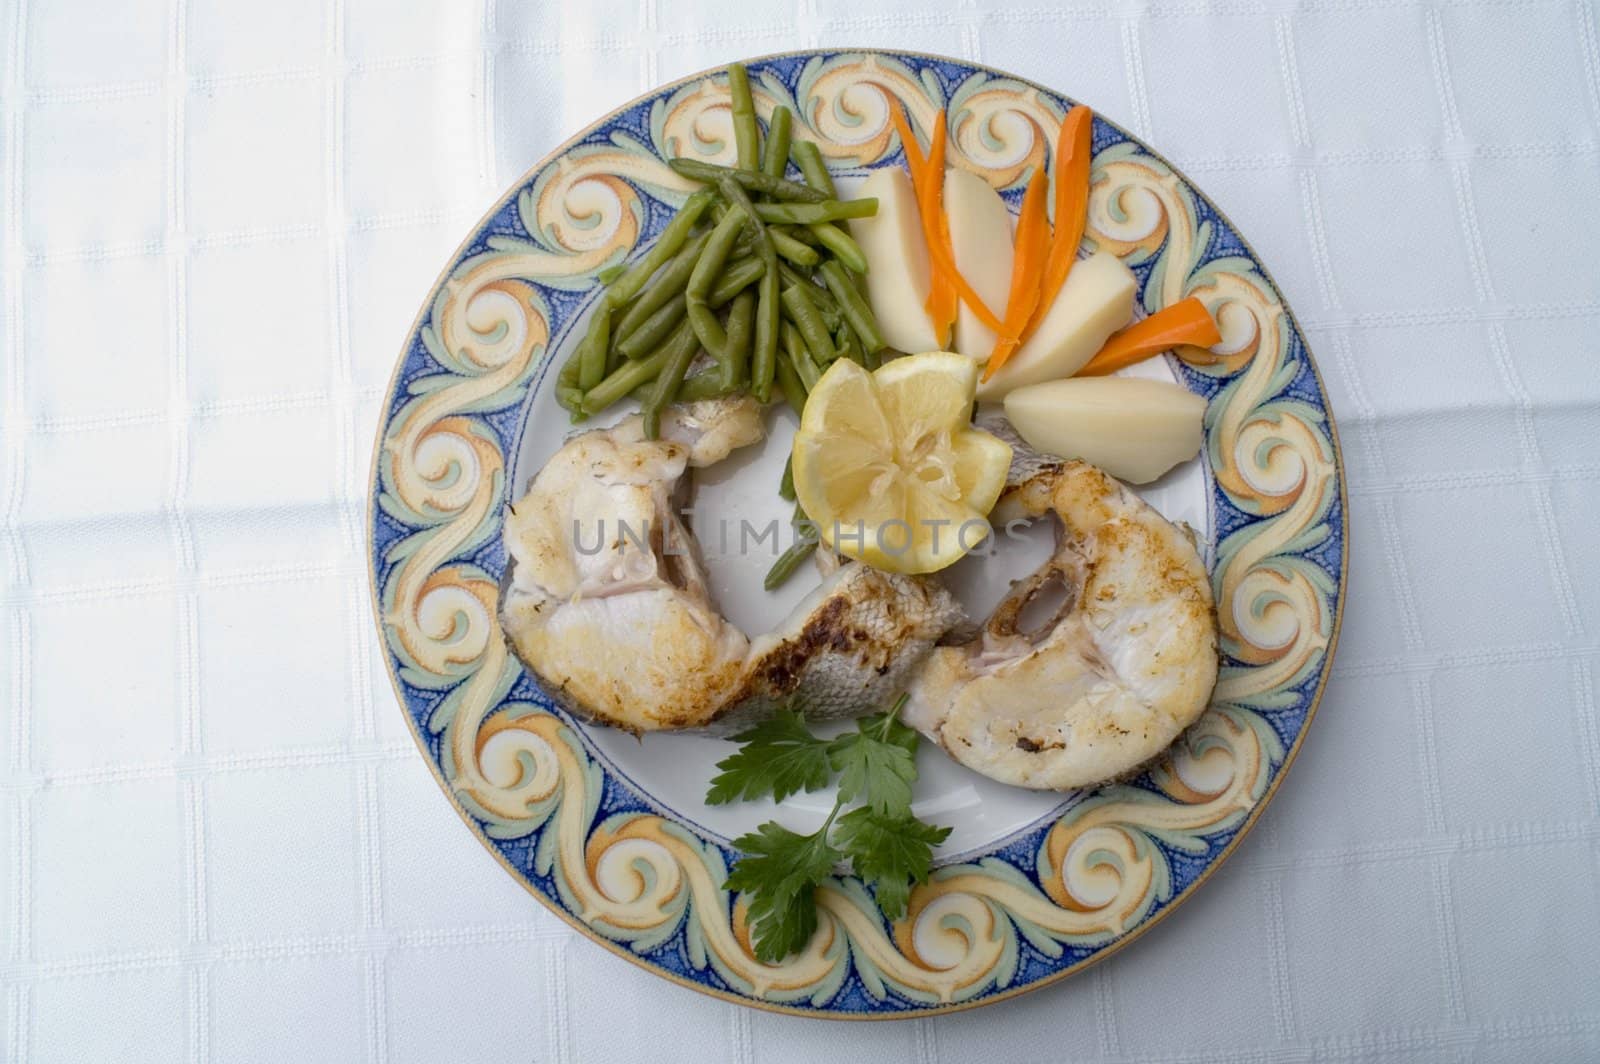 Hake with potatoes and vegetables
